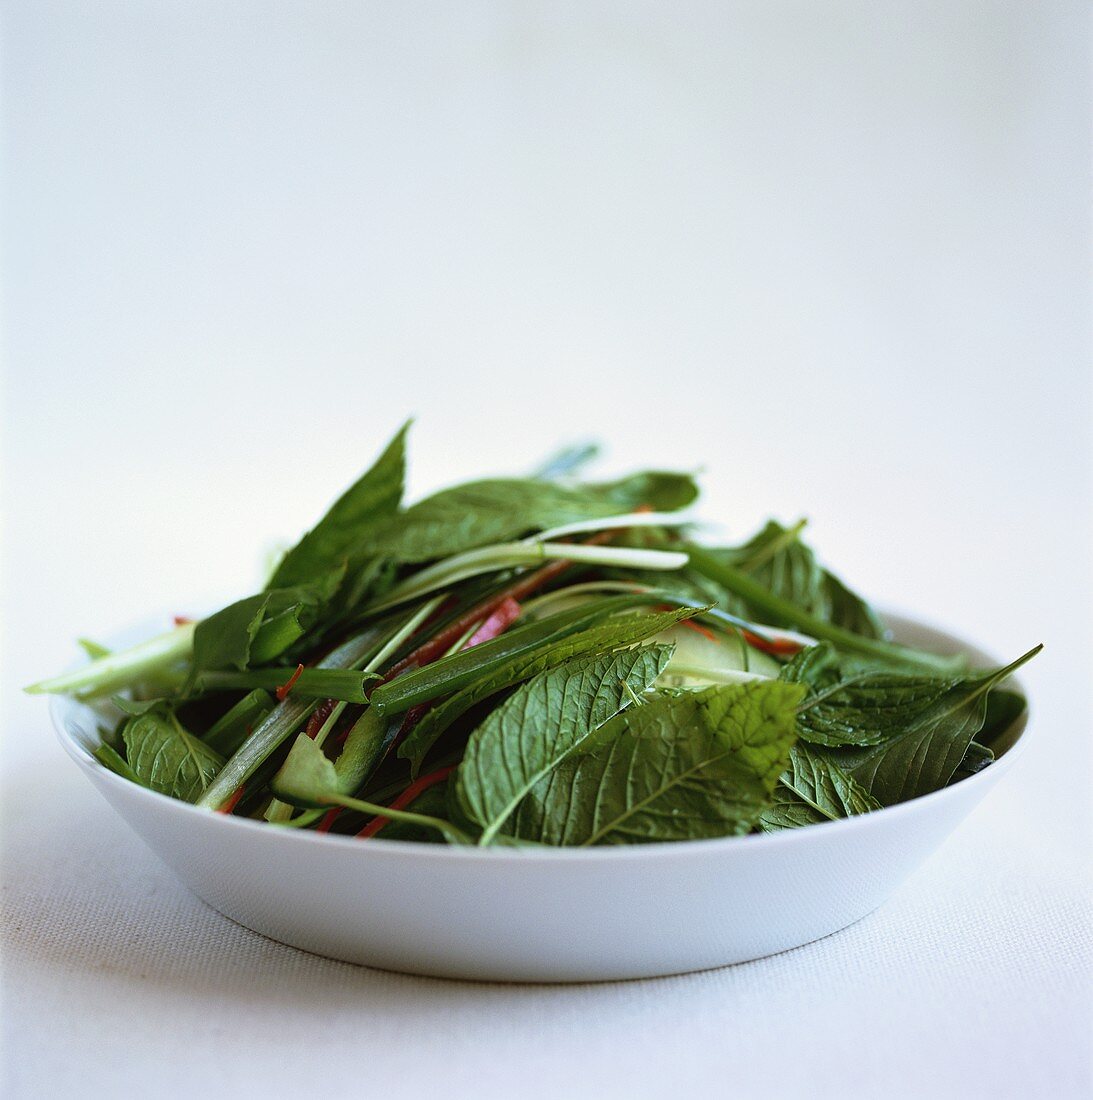 Ingredients for Asian salad with Thai basil on plate